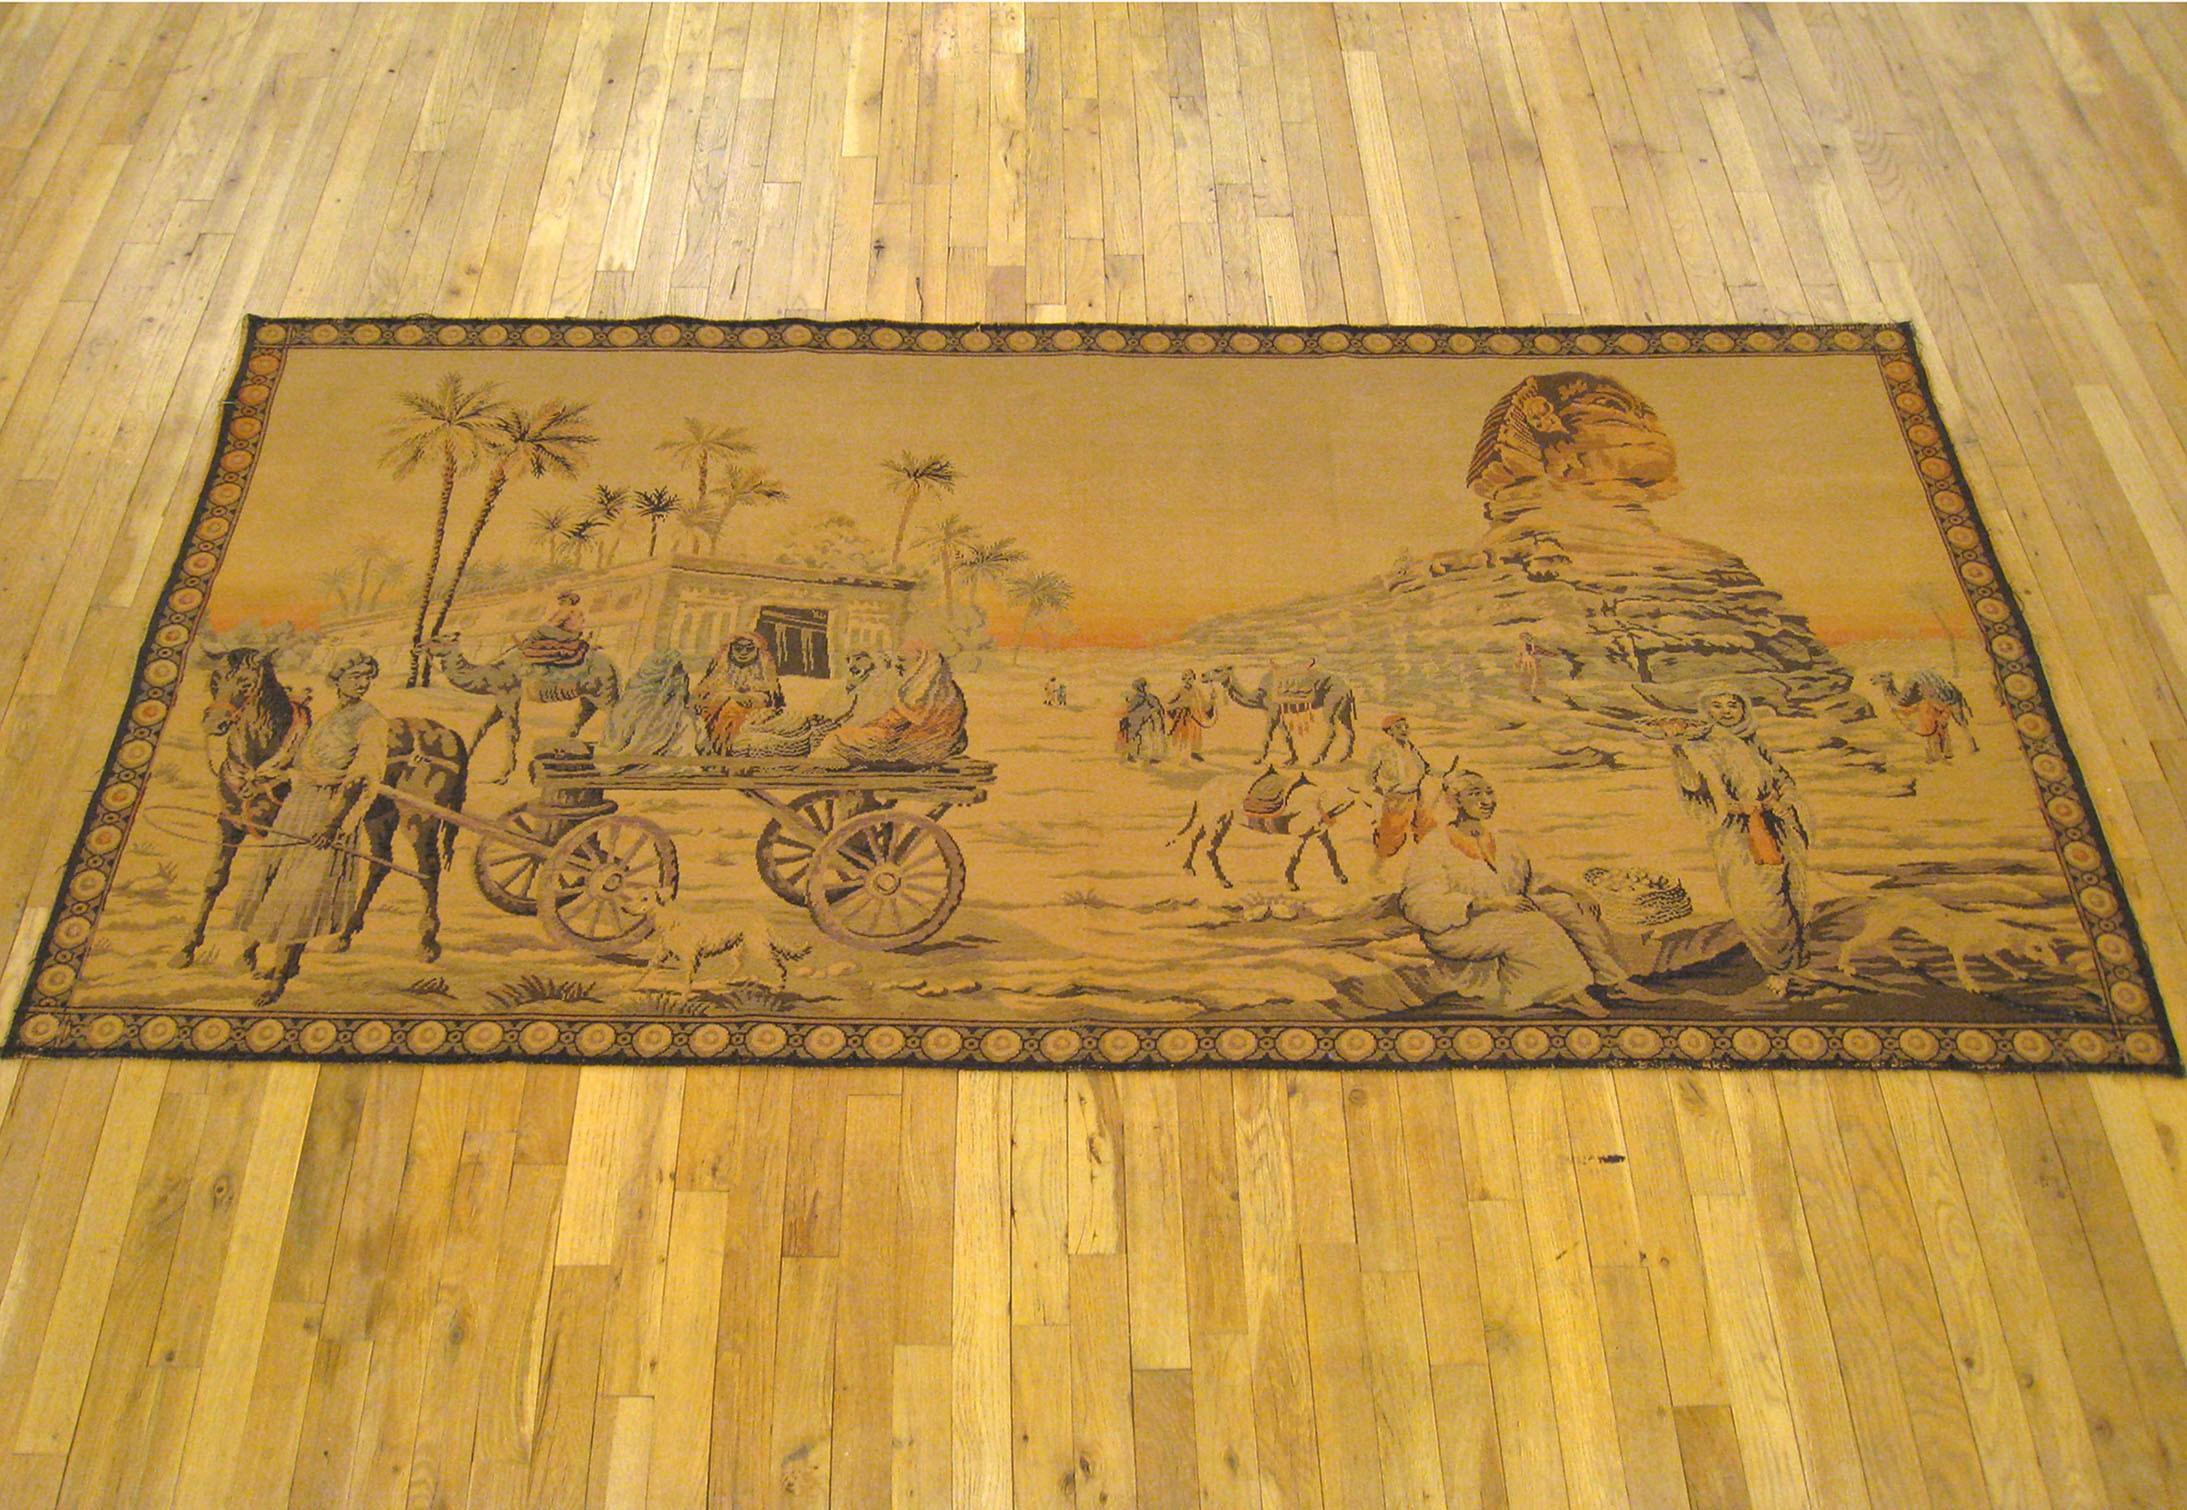 A French loomed Sphinx tapestry from circa 1900, portraying a desert scene with Egyptian locals carrying out their daily routines, but with the looming magnificence of the majestic Sphinx in the background as one of the cornerstones of their land